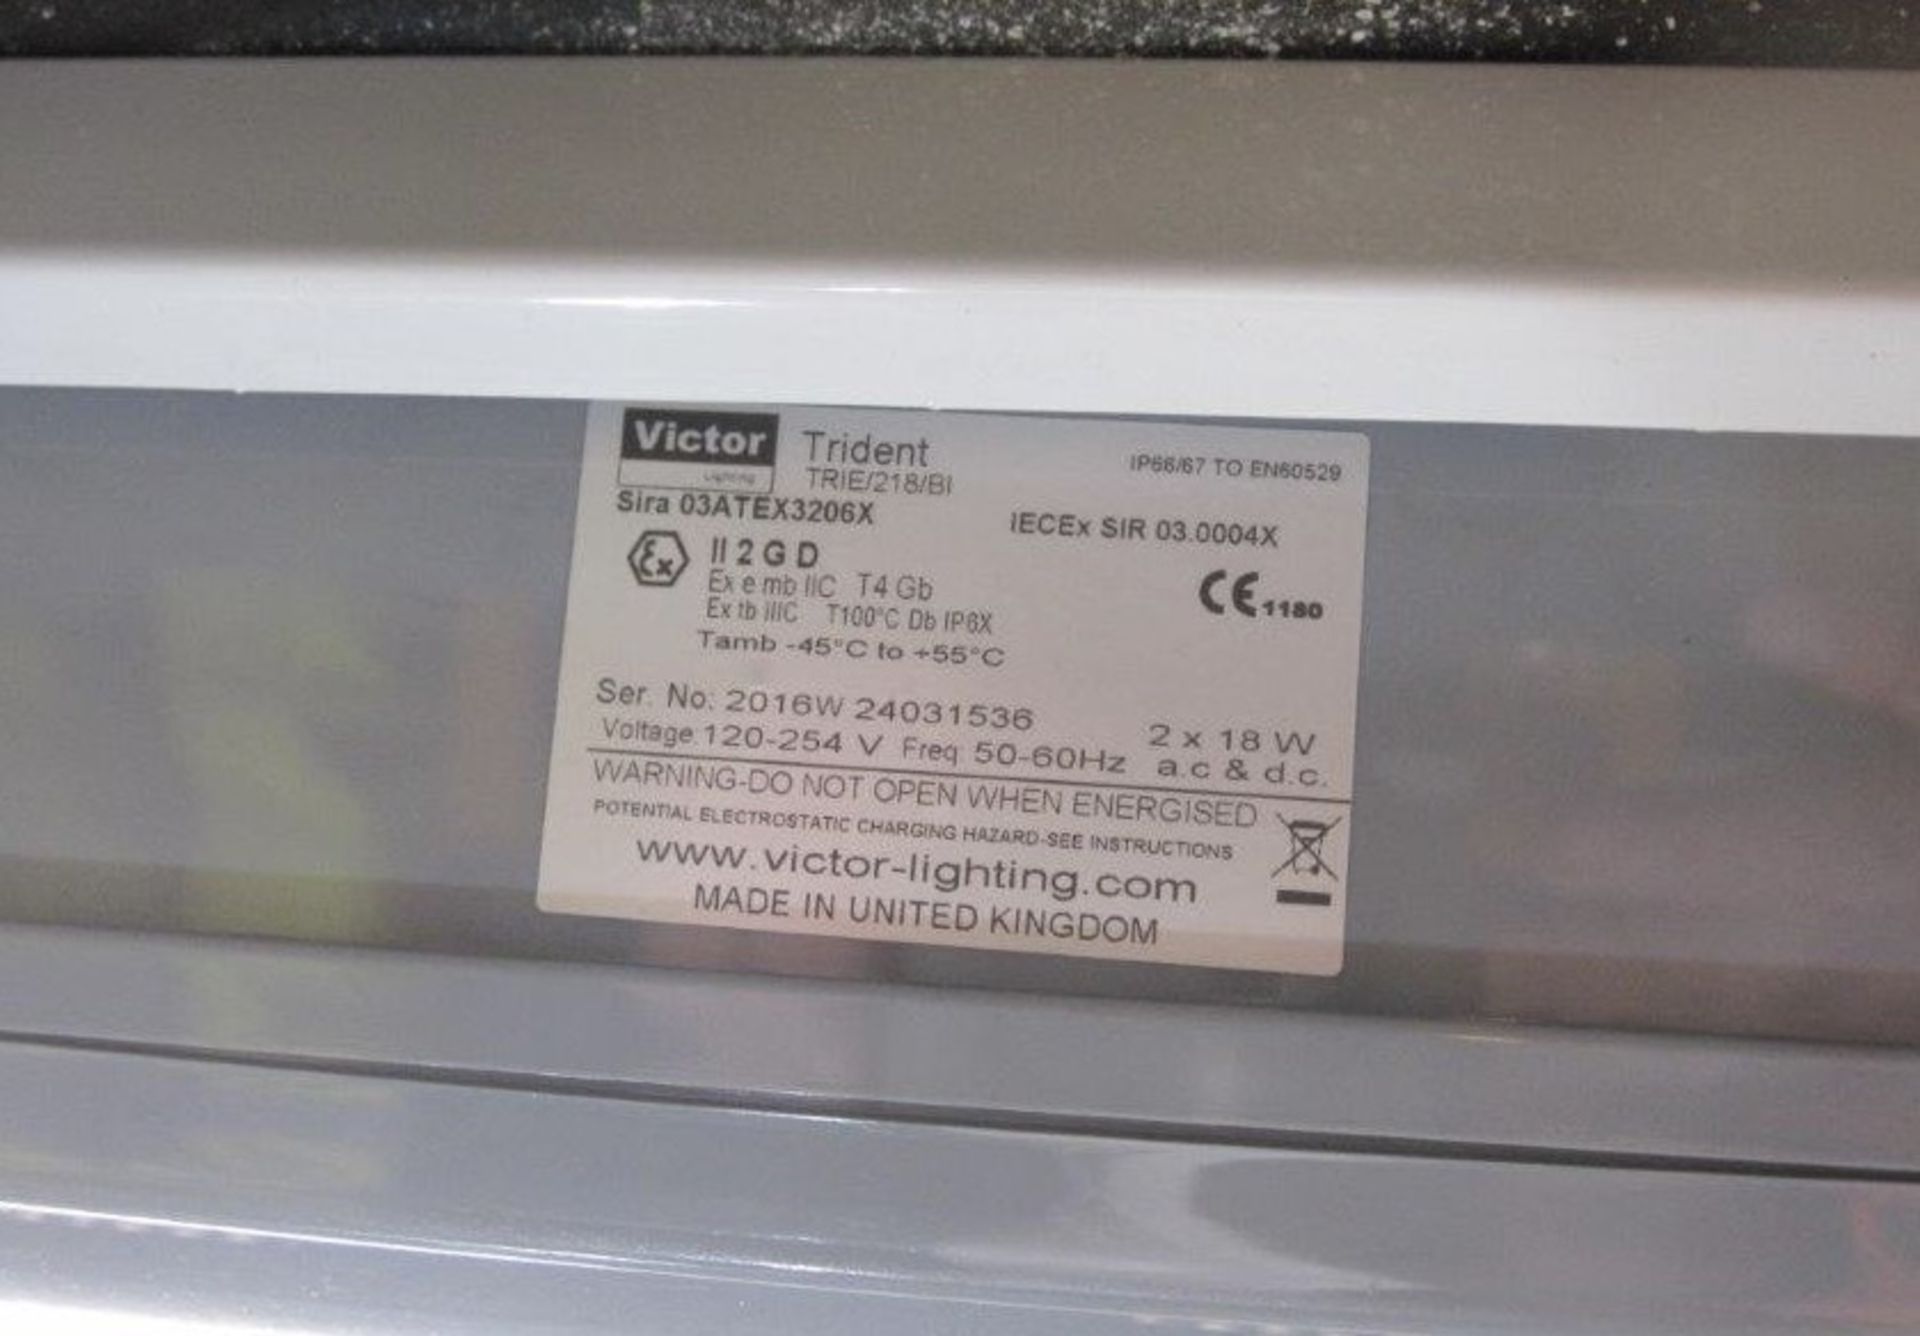 Victor Trident flameproof twin Fluorescent Light F - Image 7 of 7